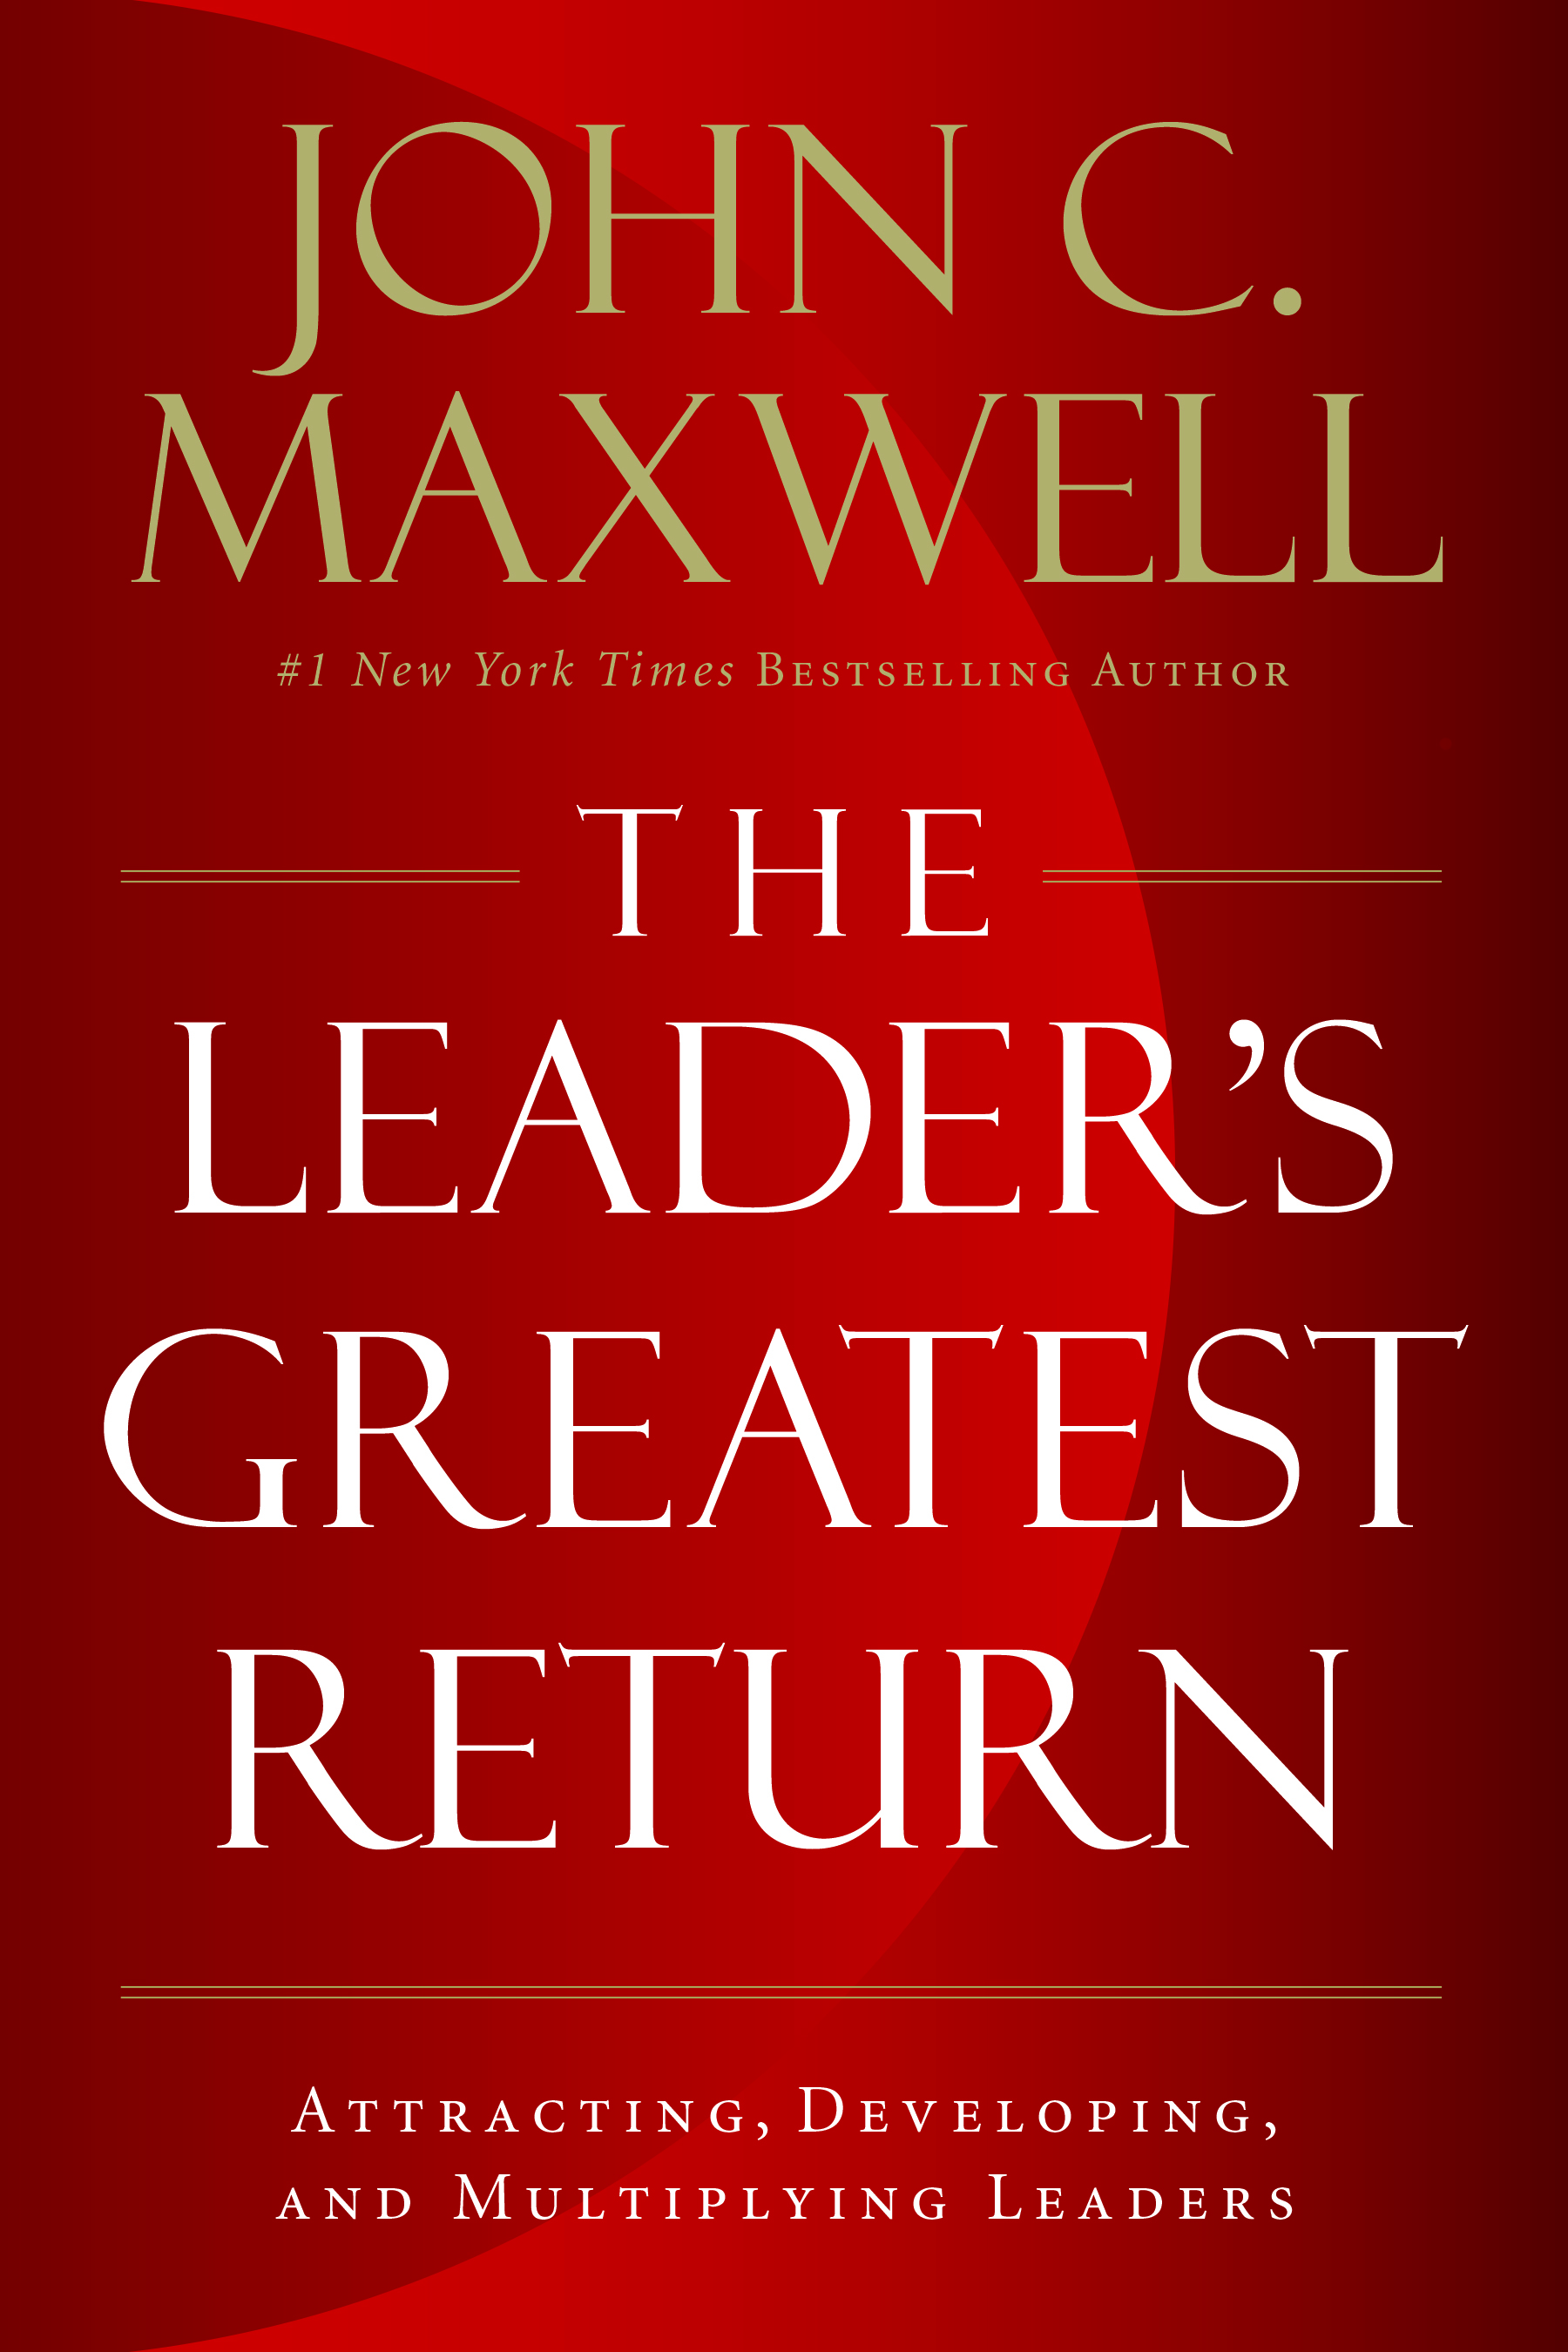 John Maxwell Start Your Personal Growth Journey with John C. Maxwell.